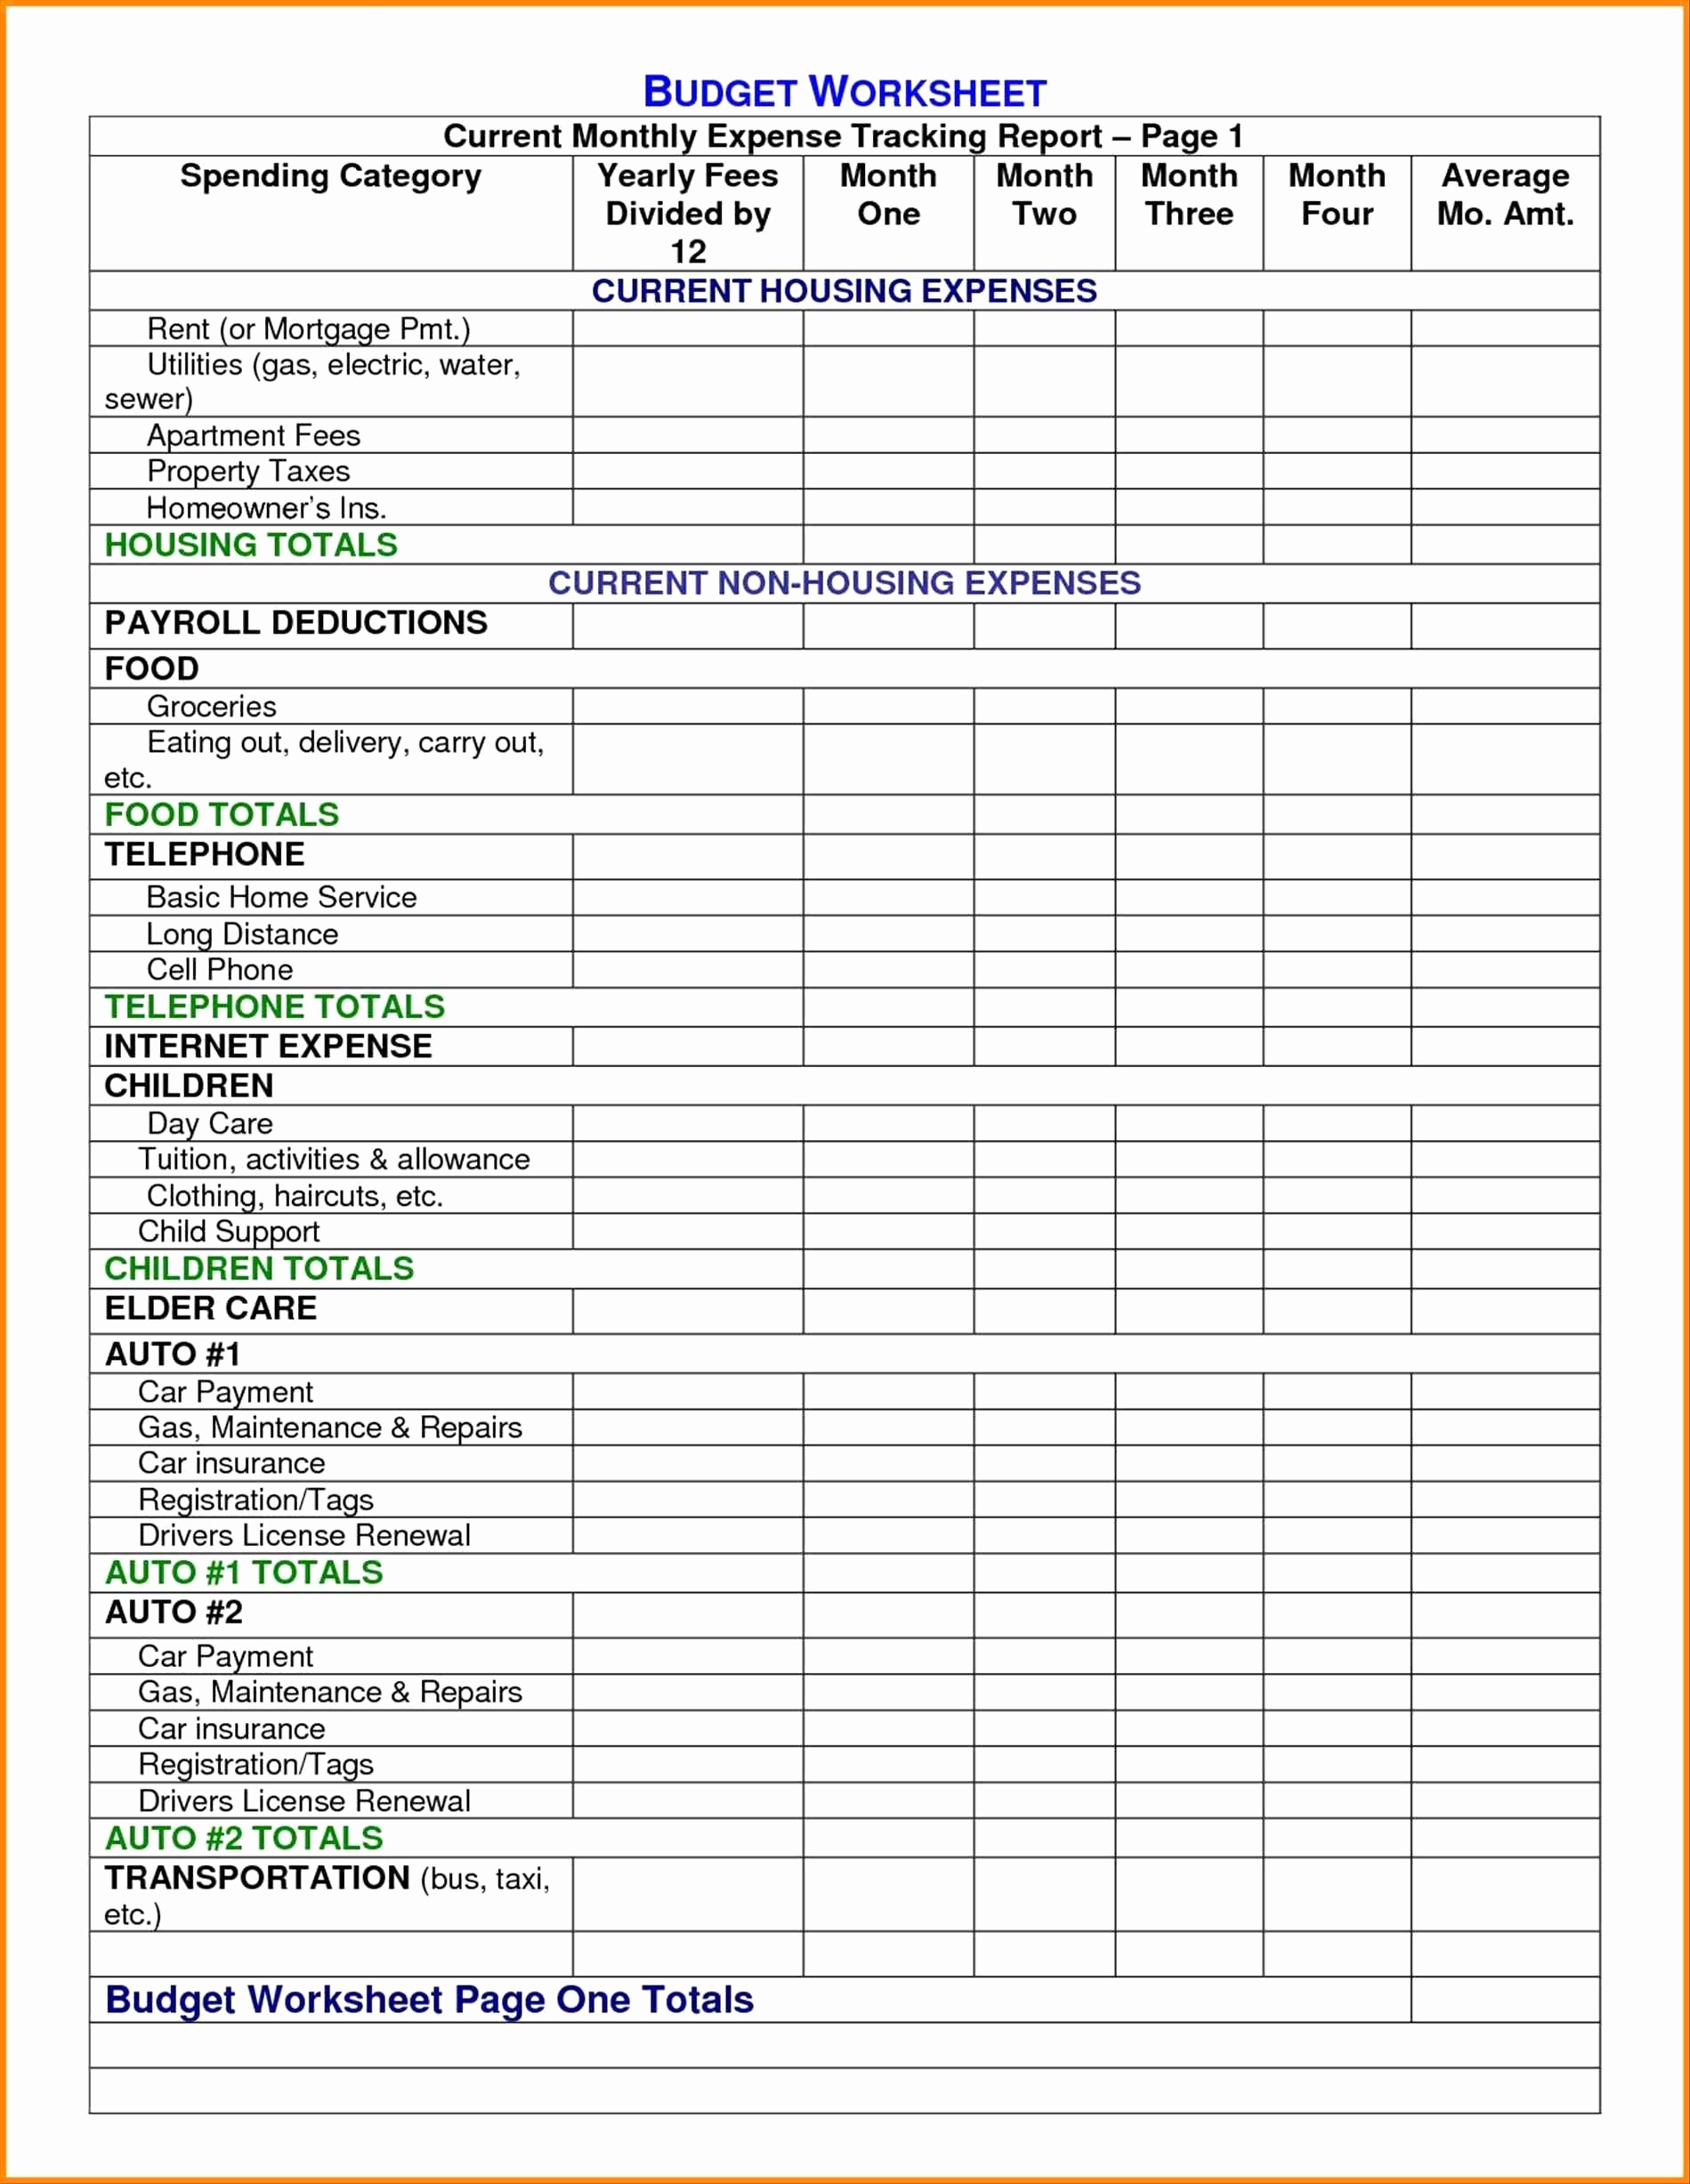 Business Expense Spreadsheet For Taxes On Inventory Spreadsheet intended for Business Expenses Spreadsheet For Taxes